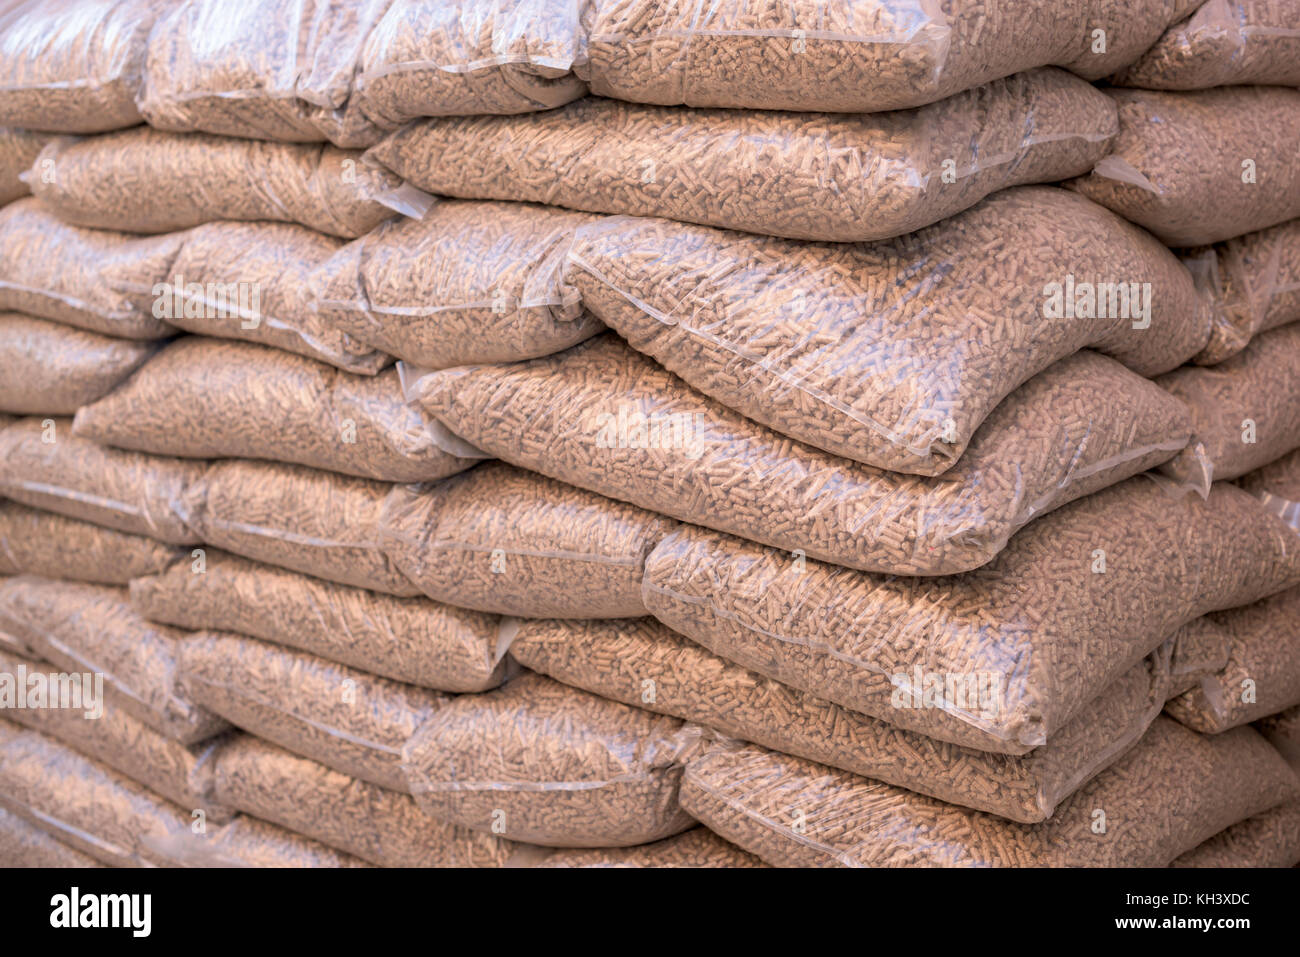 Pile of bads with biomass formed in pellets Stock Photo